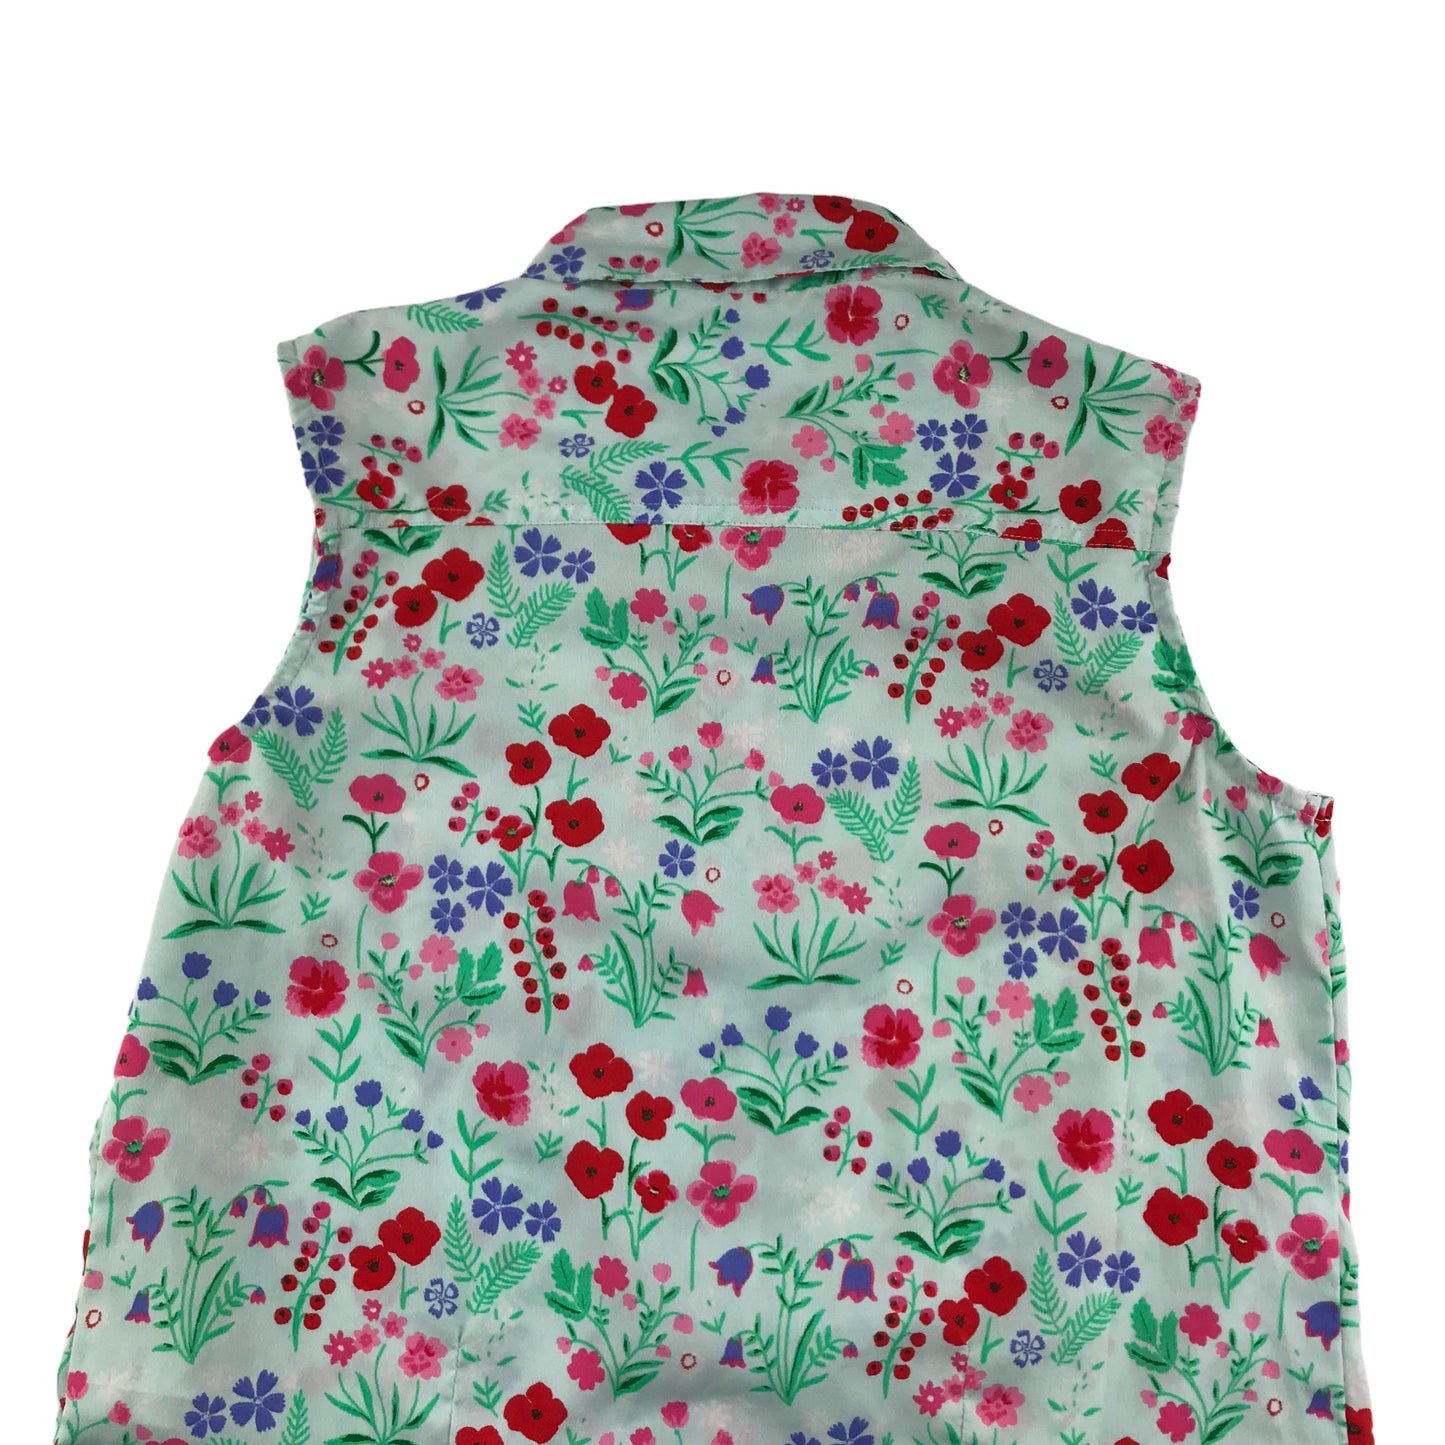 Bluezoo Top Age 11 Light Blue Floral Cropped Sleeveless Shirt Blouse